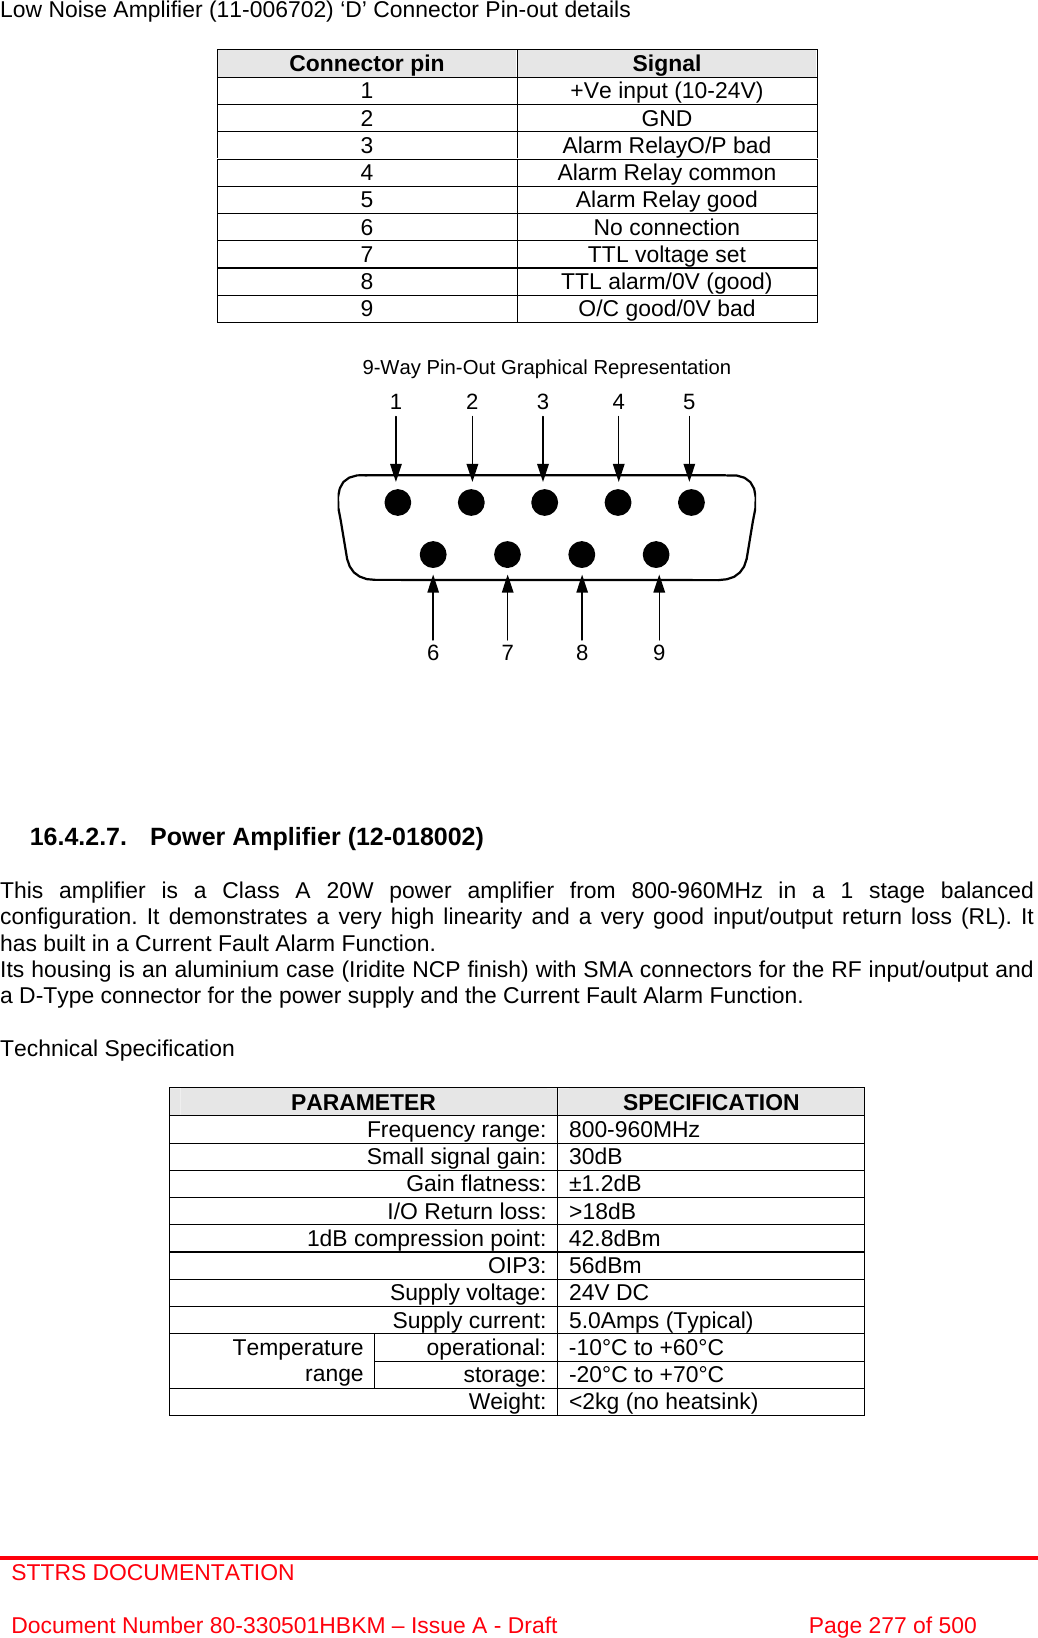 STTRS DOCUMENTATION  Document Number 80-330501HBKM – Issue A - Draft  Page 277 of 500  7 8 961 2 3 4 59-Way Pin-Out Graphical Representation Low Noise Amplifier (11-006702) ‘D’ Connector Pin-out details  Connector pin  Signal 1  +Ve input (10-24V) 2 GND 3  Alarm RelayO/P bad 4  Alarm Relay common 5  Alarm Relay good 6 No connection 7  TTL voltage set 8  TTL alarm/0V (good) 9  O/C good/0V bad                    16.4.2.7.  Power Amplifier (12-018002)  This amplifier is a Class A 20W power amplifier from 800-960MHz in a 1 stage balanced configuration. It demonstrates a very high linearity and a very good input/output return loss (RL). It has built in a Current Fault Alarm Function. Its housing is an aluminium case (Iridite NCP finish) with SMA connectors for the RF input/output and a D-Type connector for the power supply and the Current Fault Alarm Function.  Technical Specification  PARAMETER  SPECIFICATION Frequency range: 800-960MHz Small signal gain: 30dB Gain flatness: ±1.2dB I/O Return loss: &gt;18dB 1dB compression point: 42.8dBm OIP3: 56dBm Supply voltage: 24V DC Supply current: 5.0Amps (Typical) operational: -10°C to +60°C Temperature range  storage: -20°C to +70°C Weight: &lt;2kg (no heatsink)  